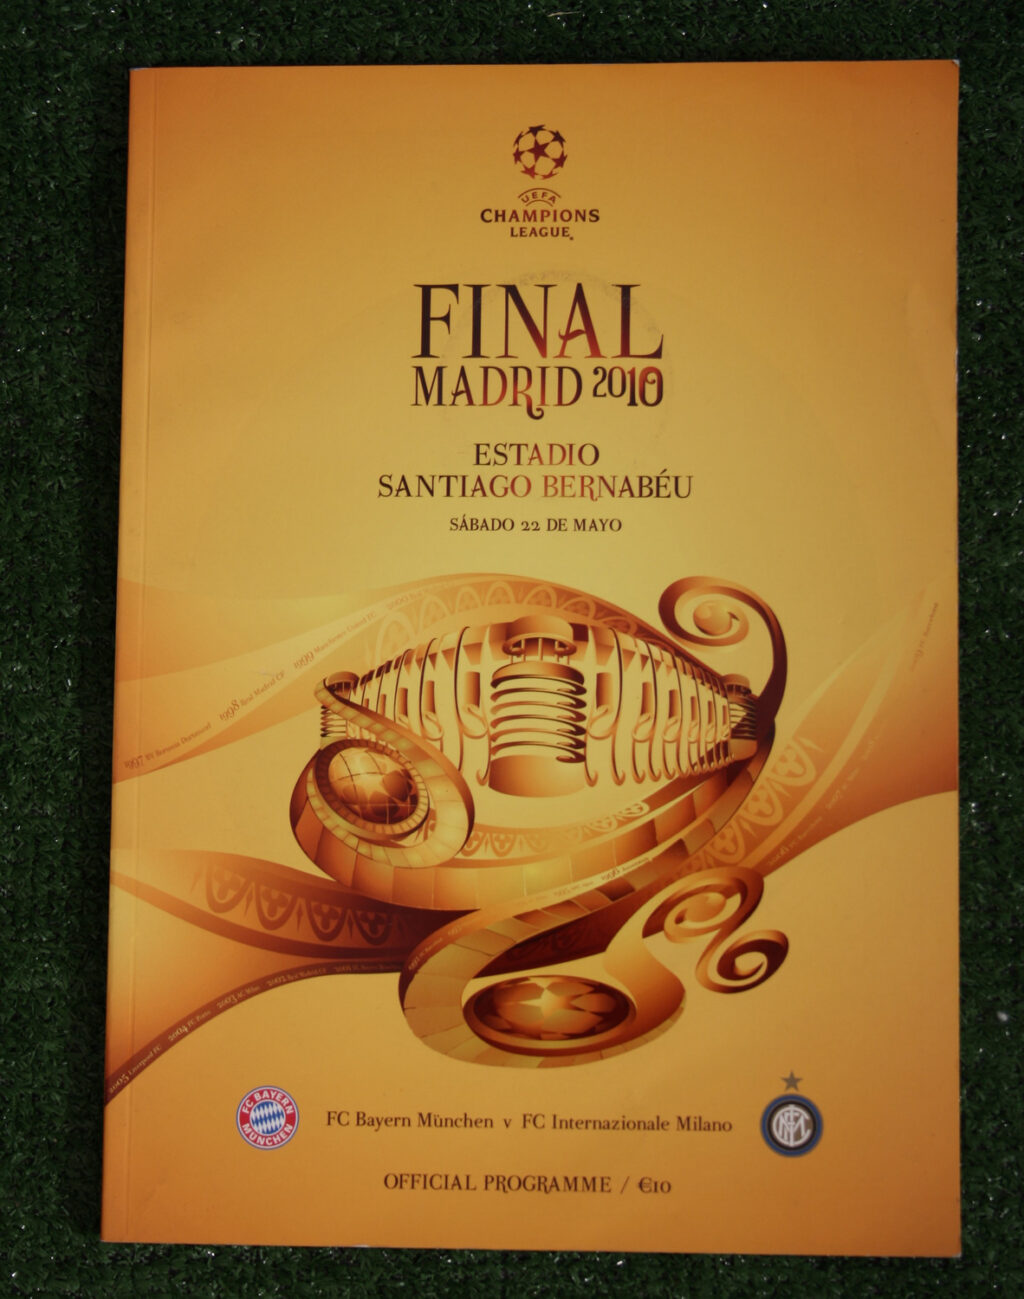 Finale Madrid 2010 Official Programme